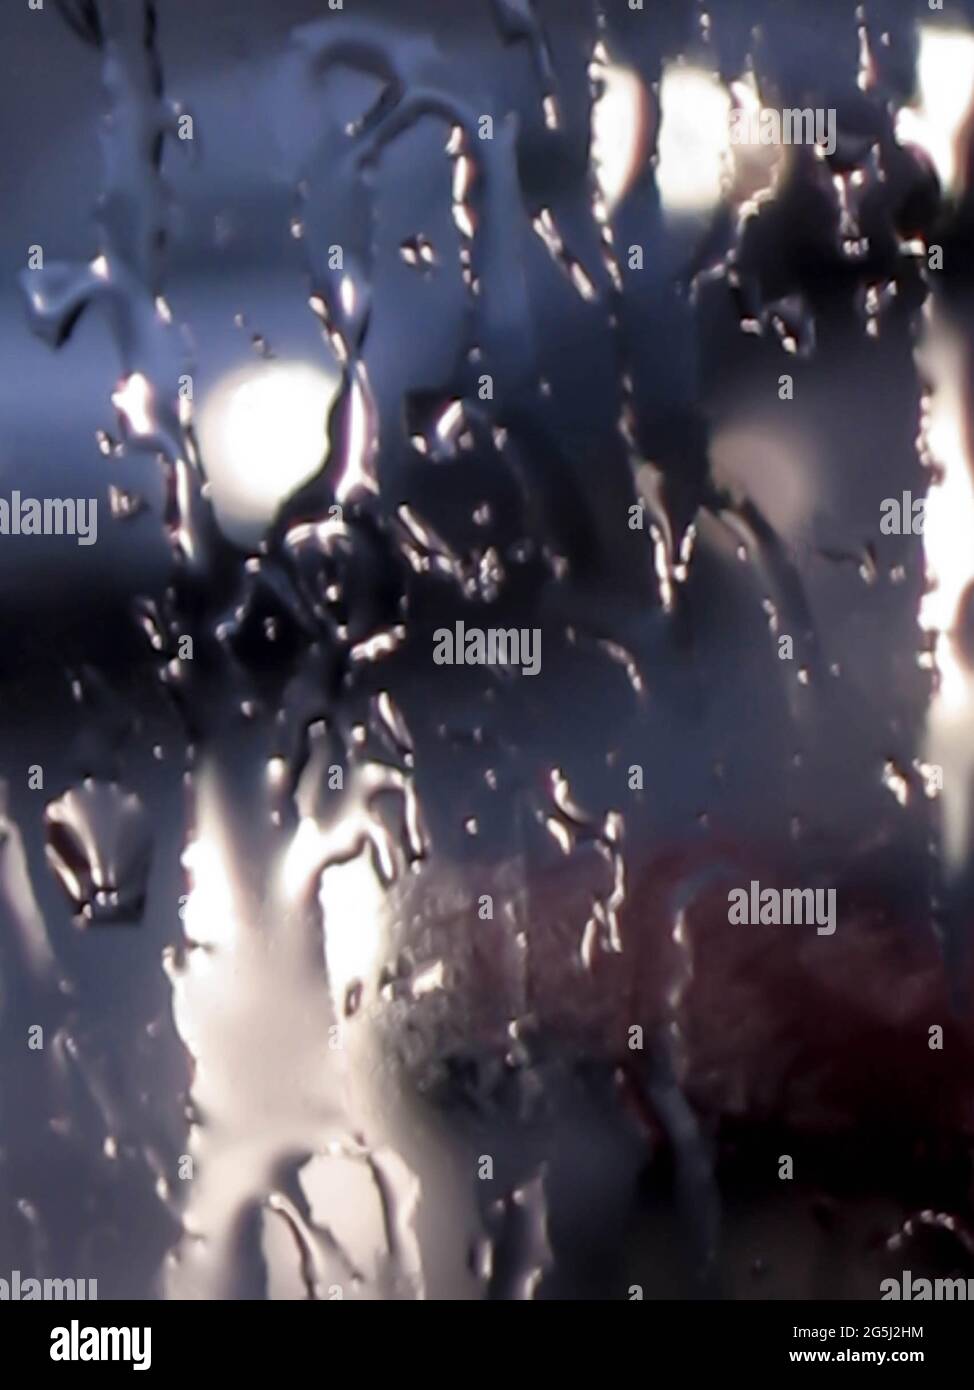 Blurred abstract moody defocused close-up background of bad weather raindrops splashing against a wet  transparent glass window. Stock Photo